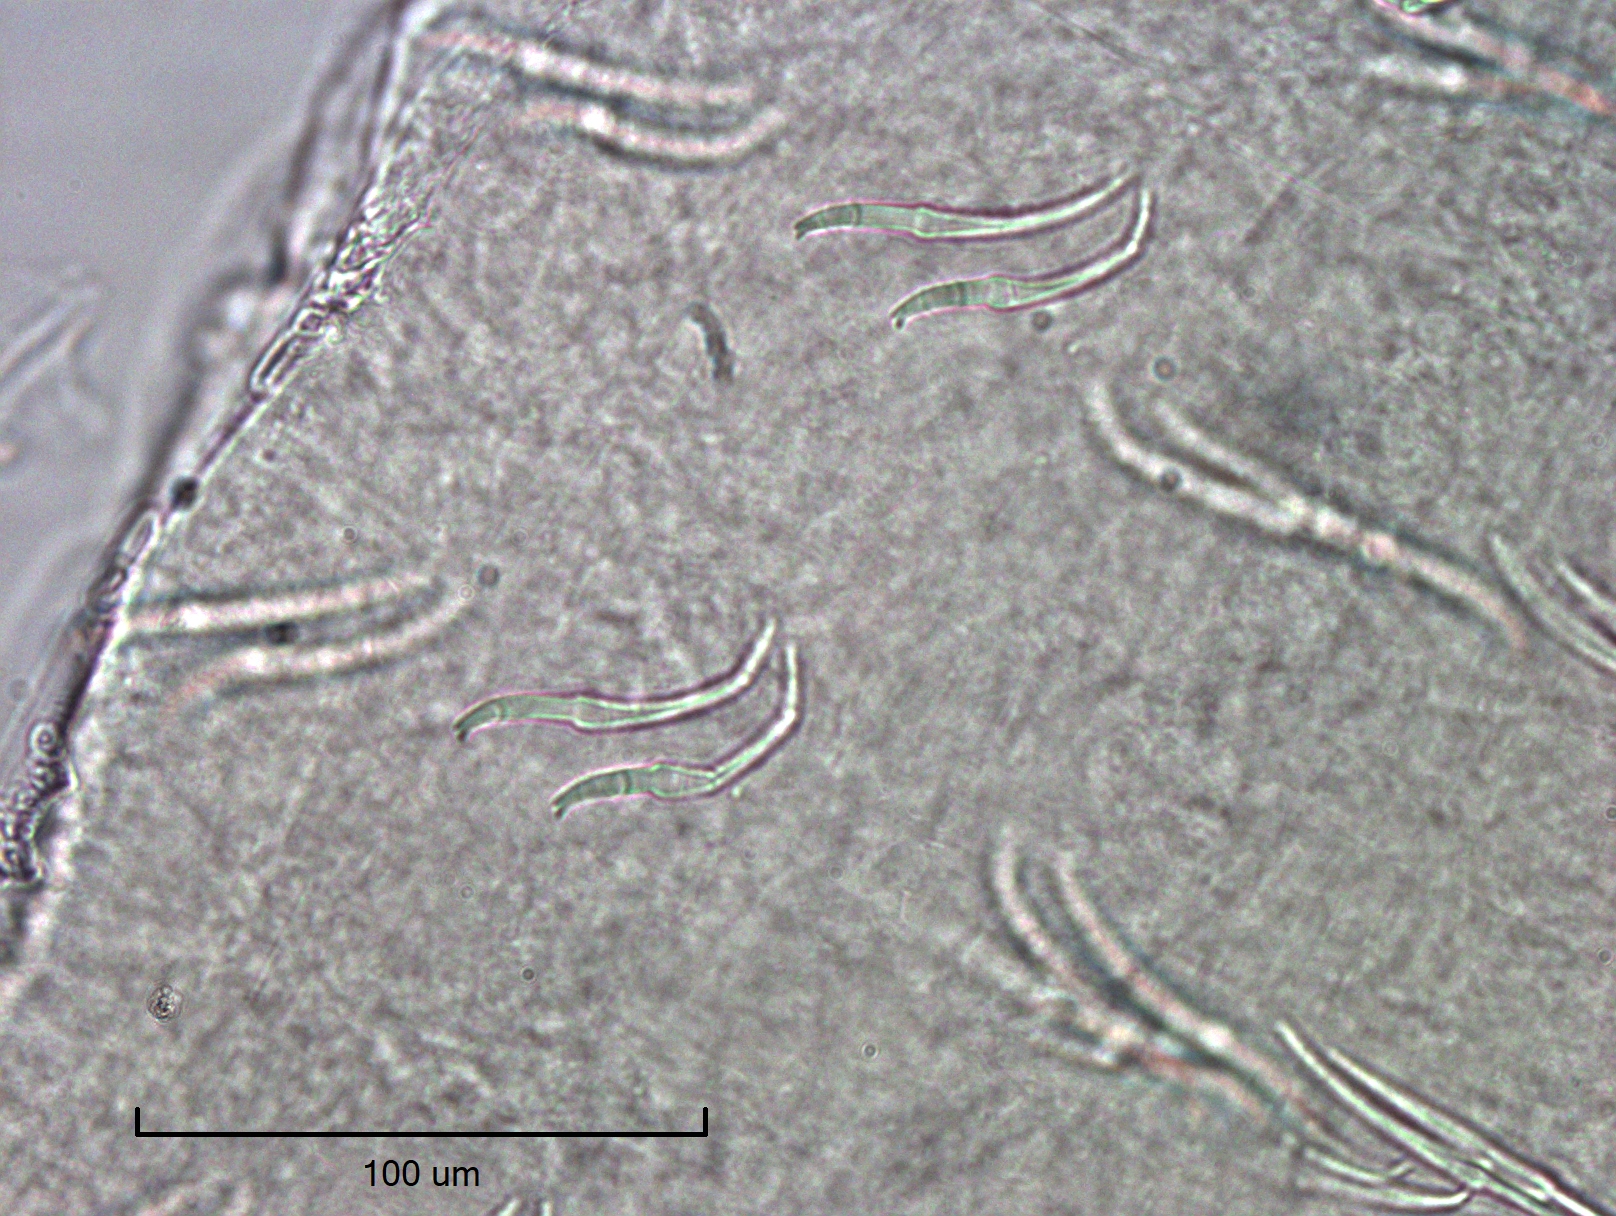 photomicrograph of sets of two worm hairs (chaetae) with the upper tooth much smaller than the lower tooth